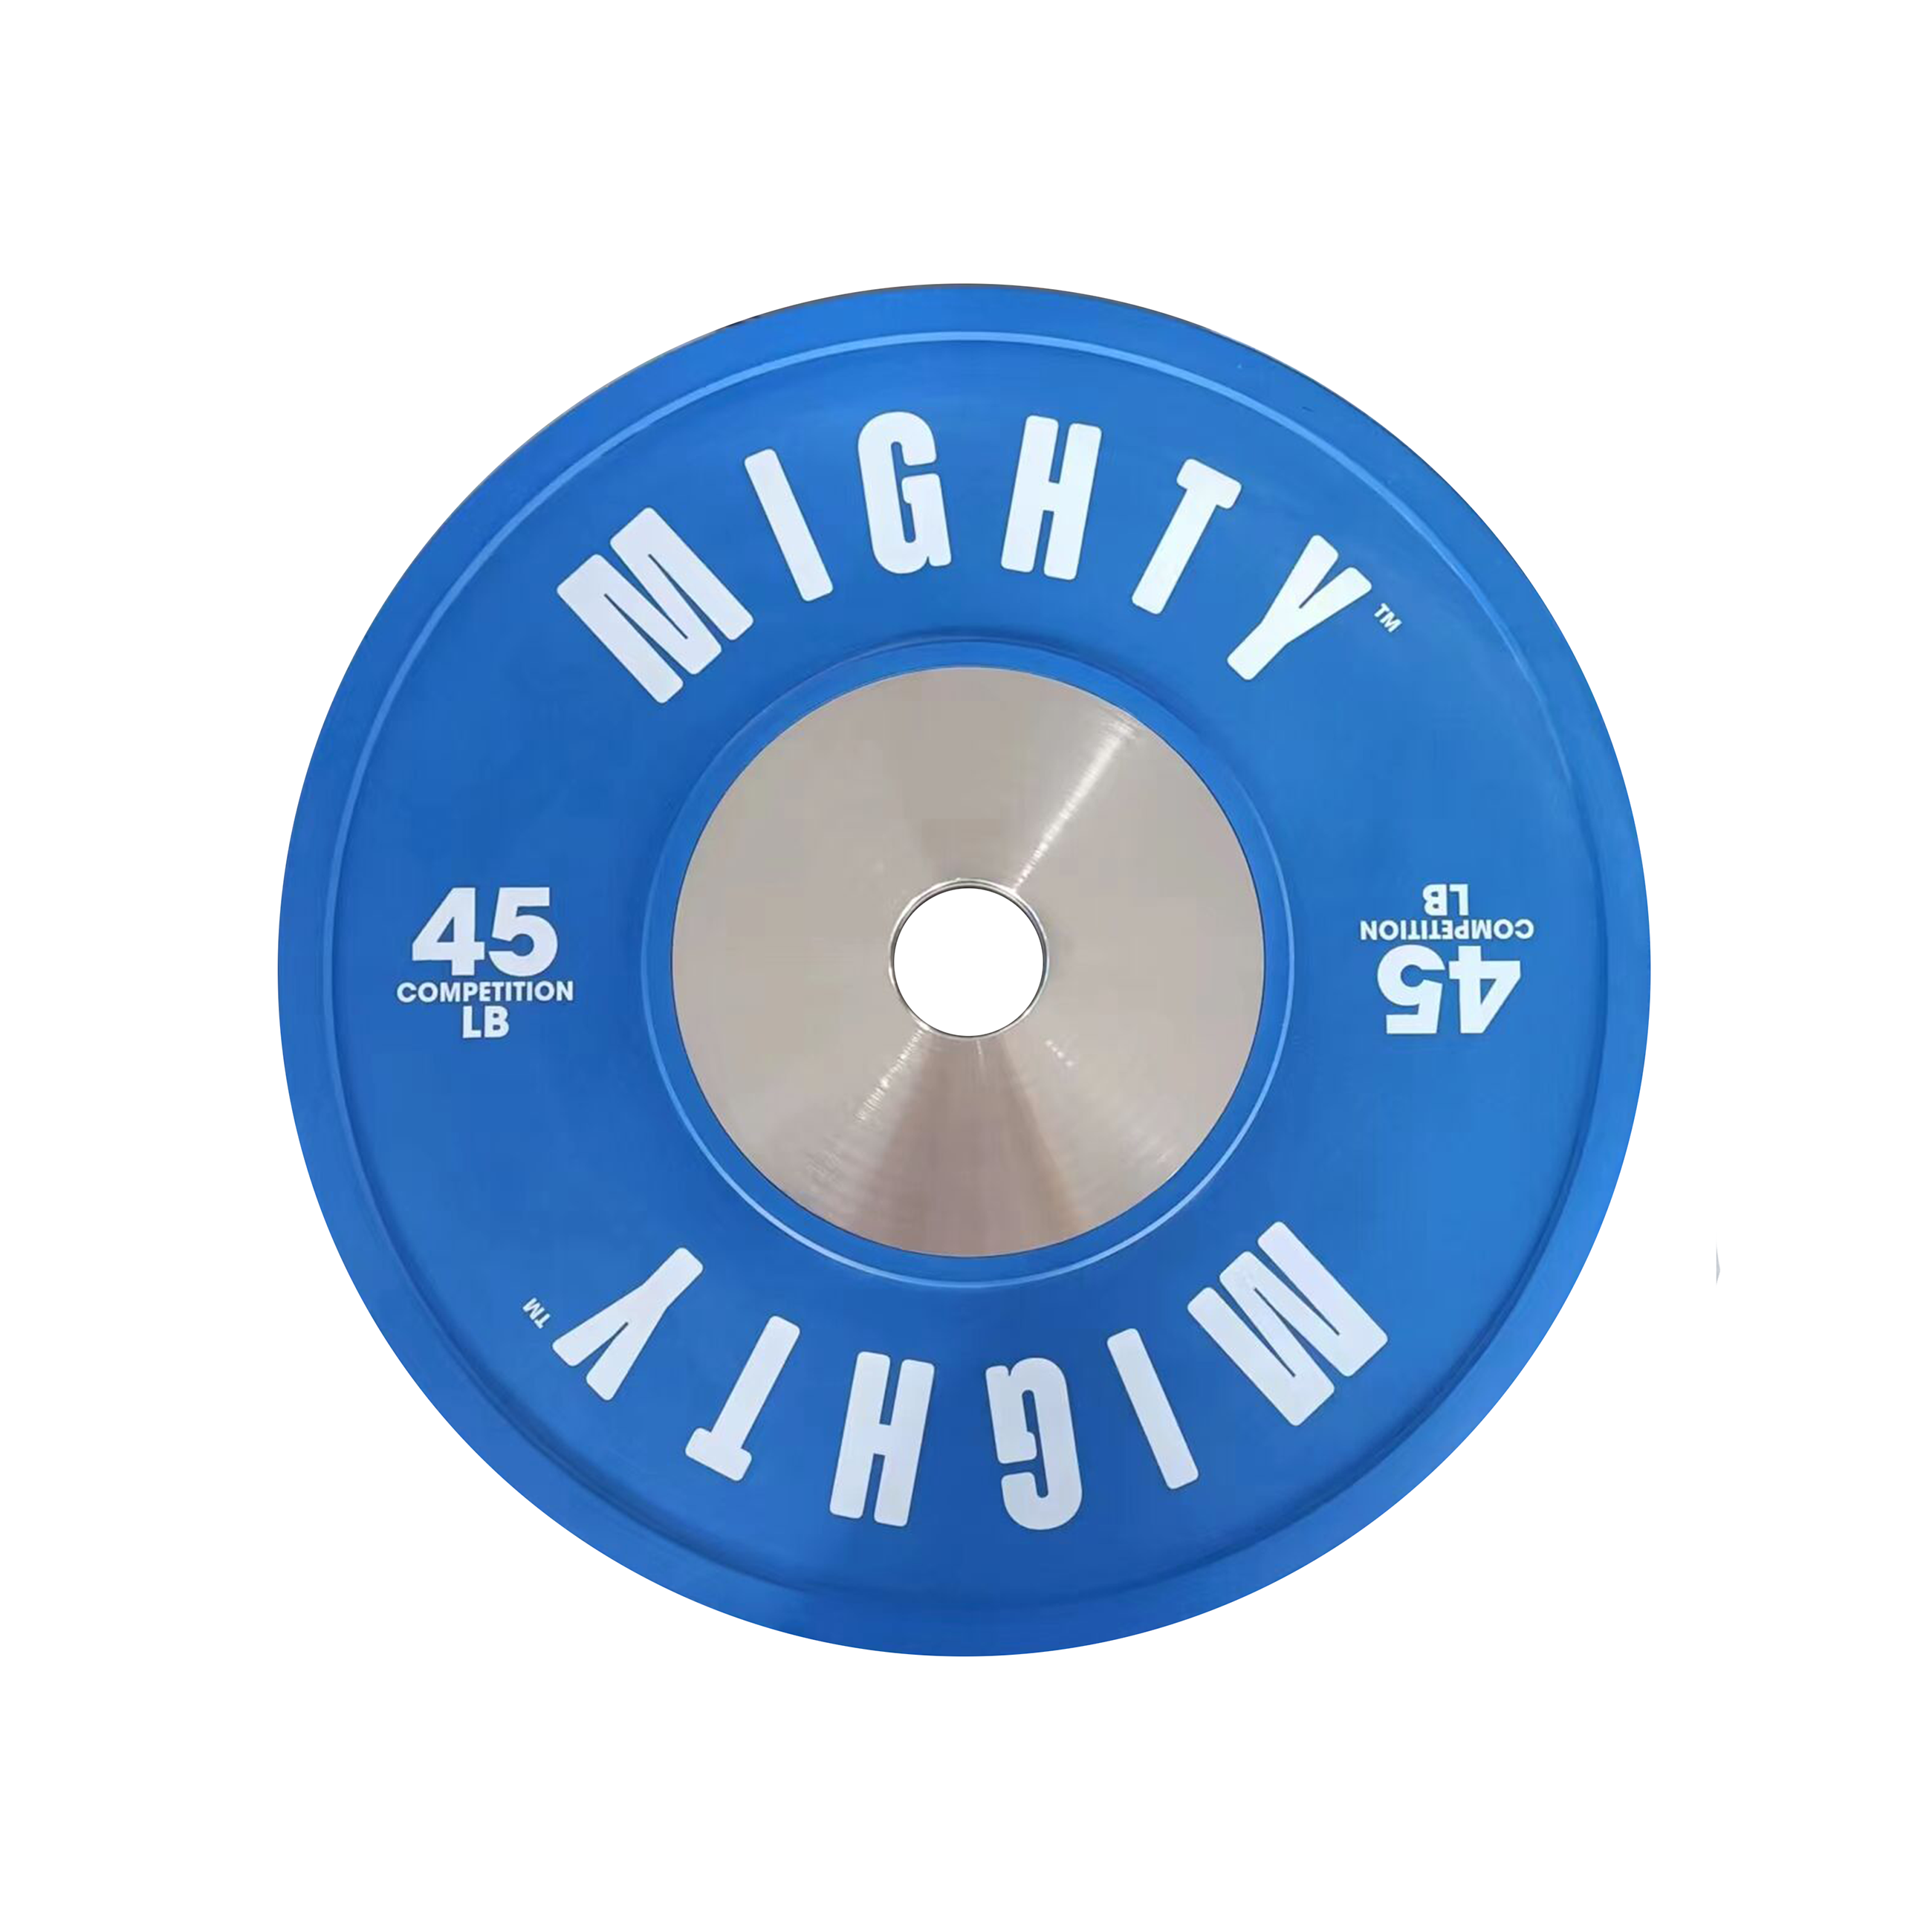 Mighty Competition Bumper Plates - Elite